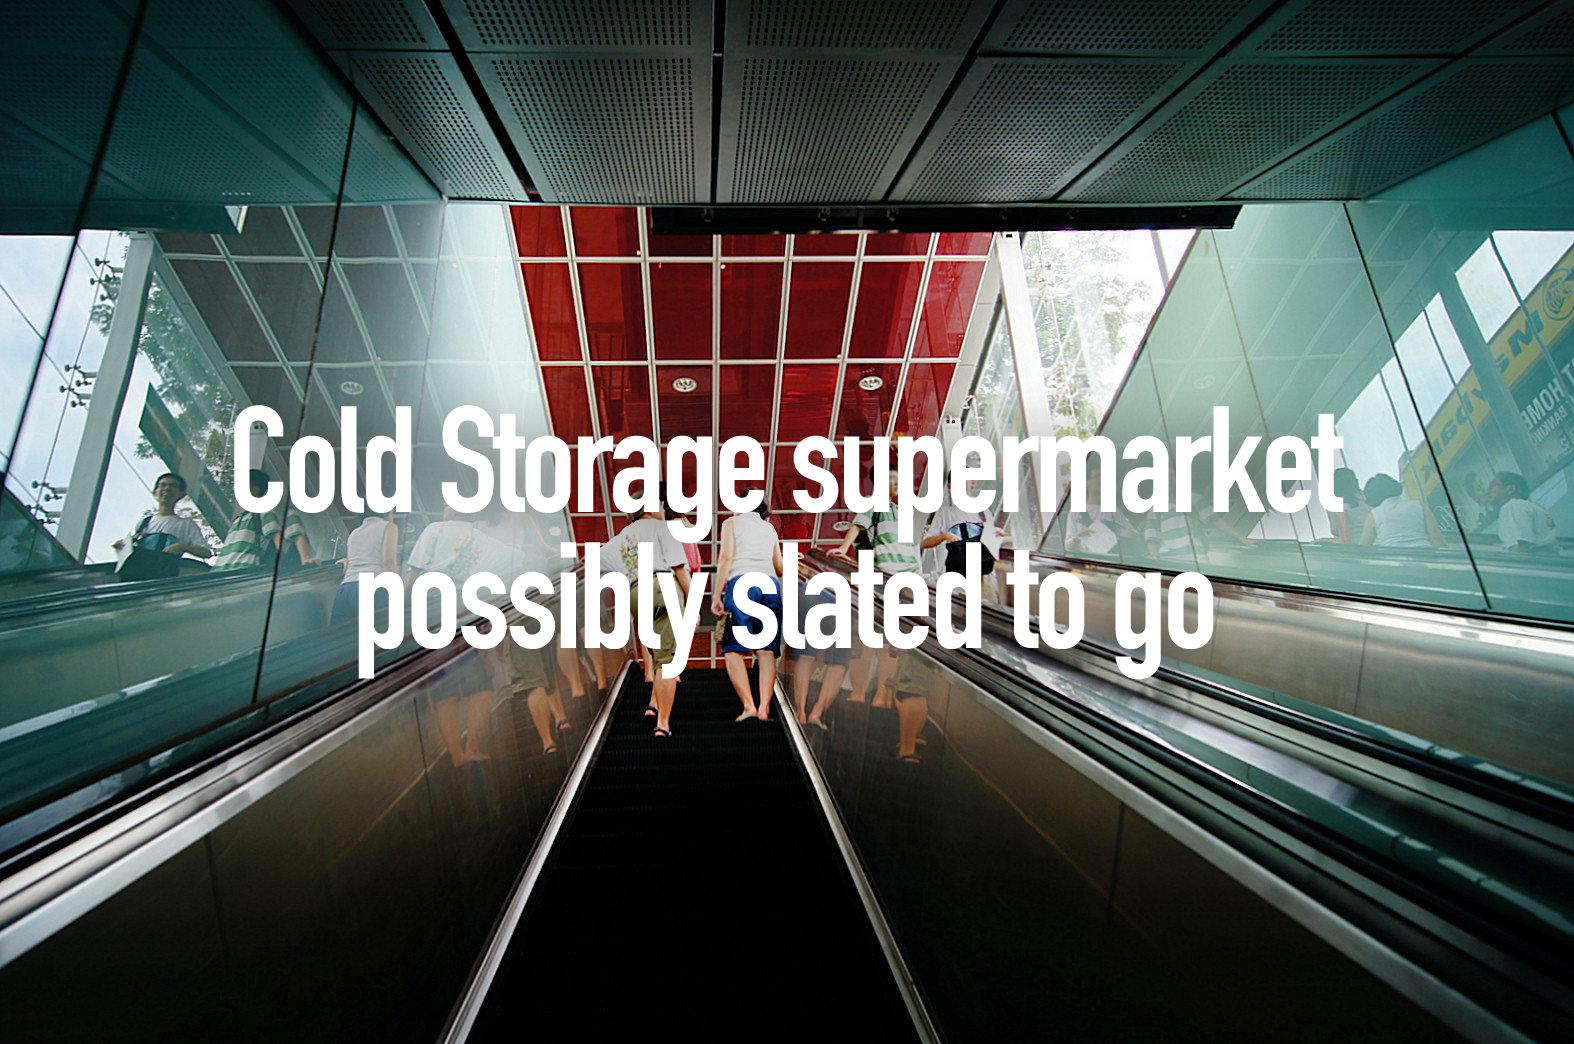 cold-storage-supermarket-possibly-slated-to-go